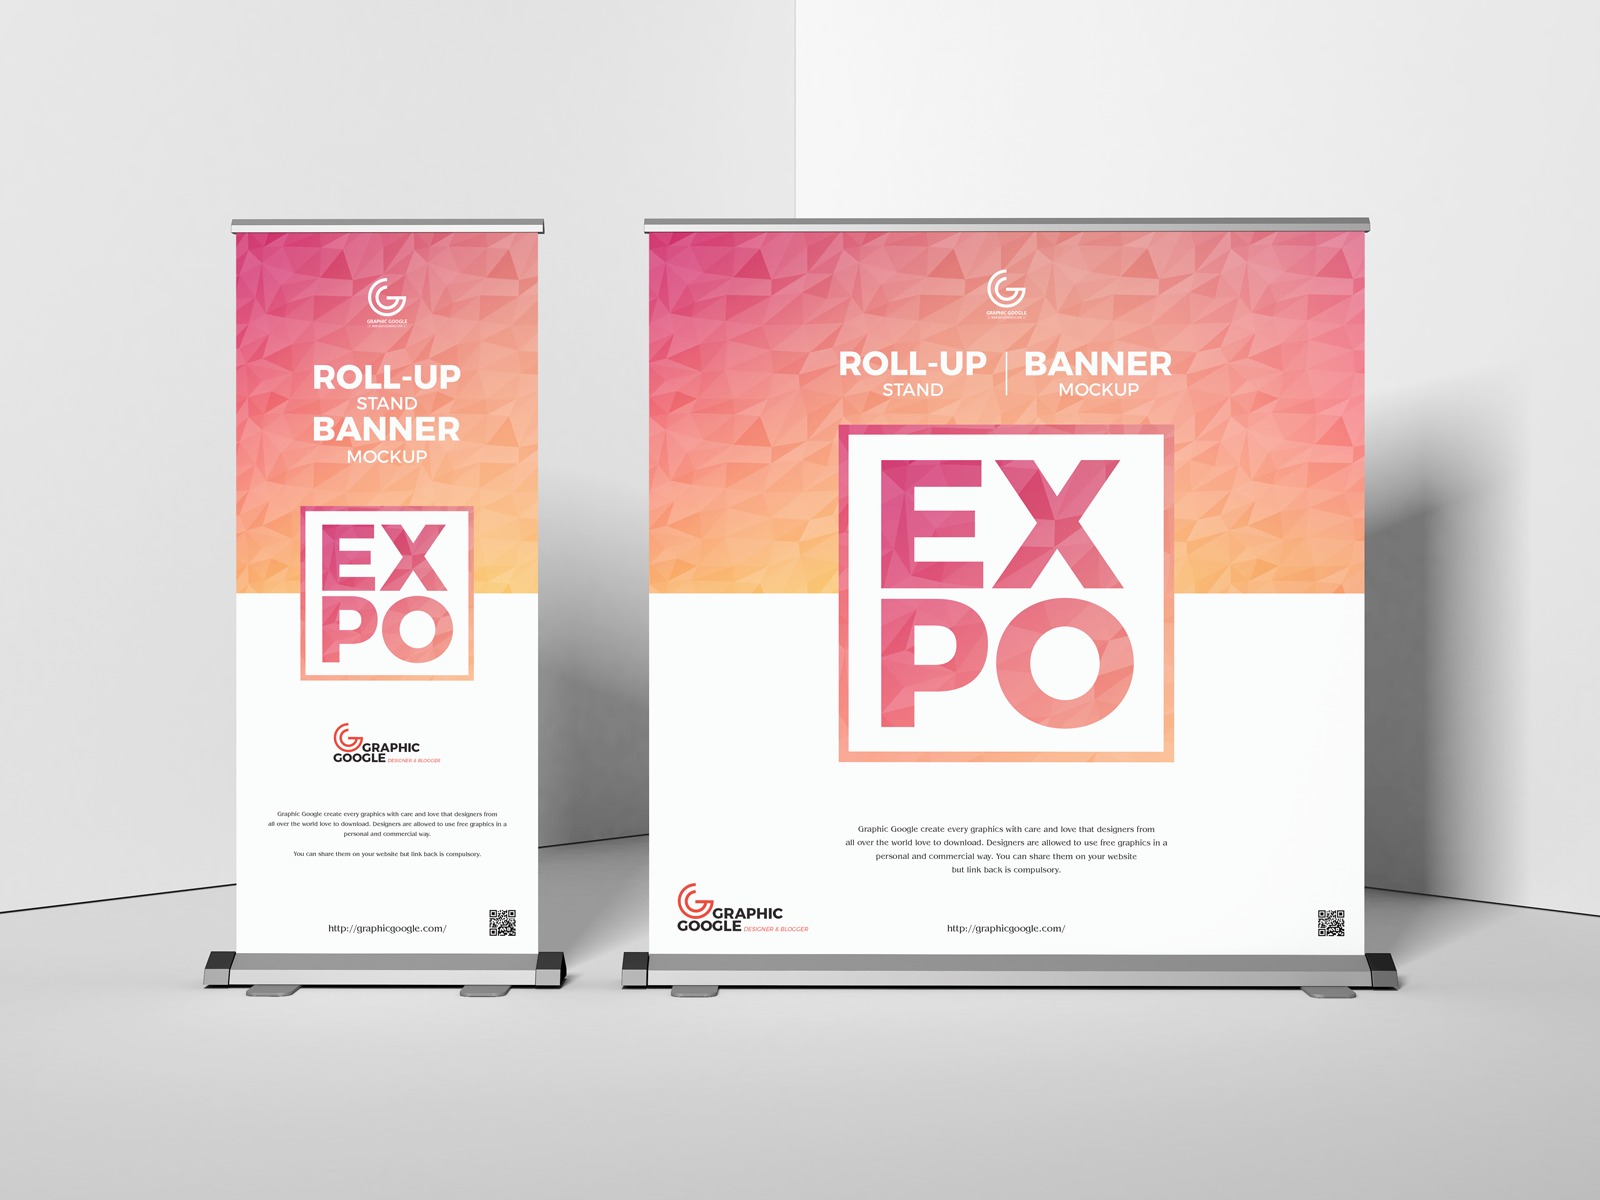 Free Expo Roll-Up Stand Banner Mockup by Graphic Google on Dribbble